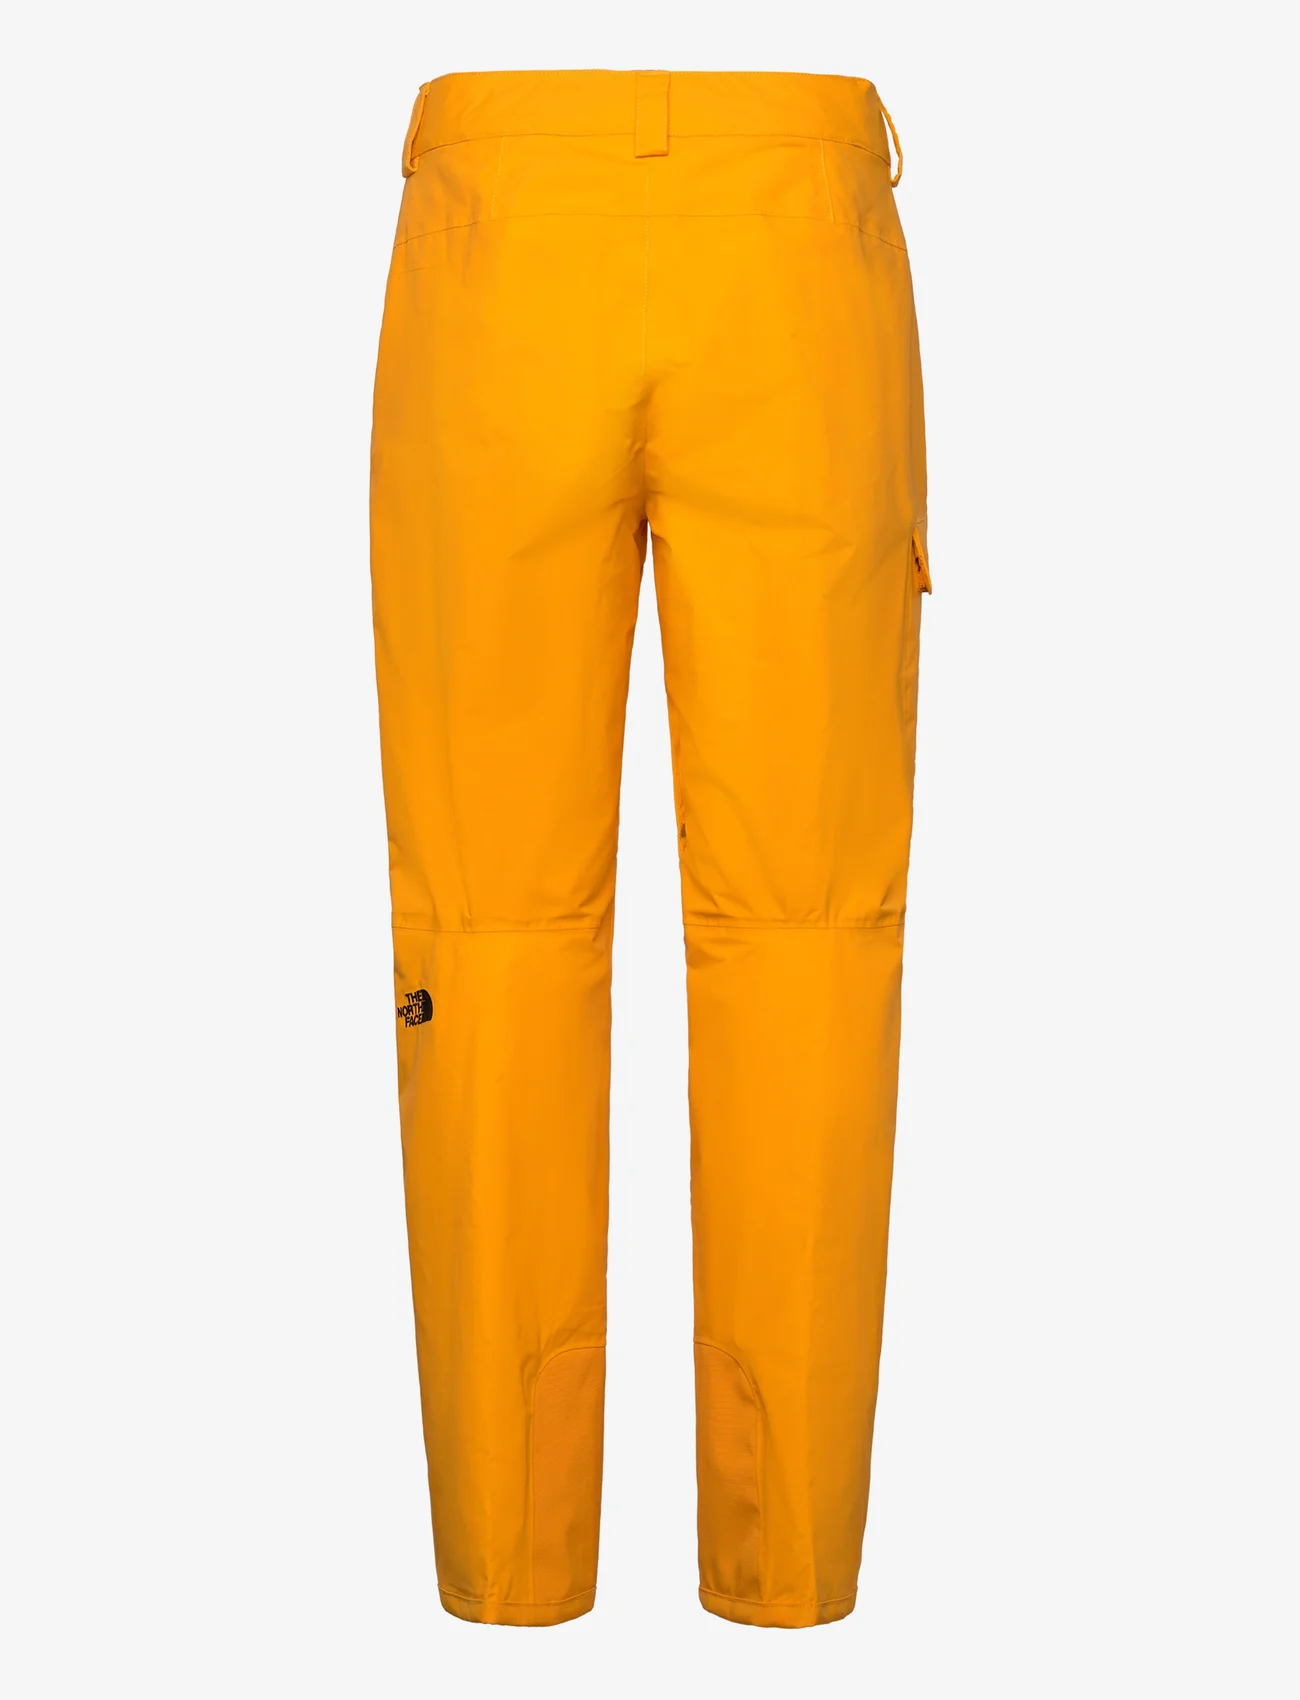 The North Face - M FREEDOM PANT - skidbyxor - summit gold - 1